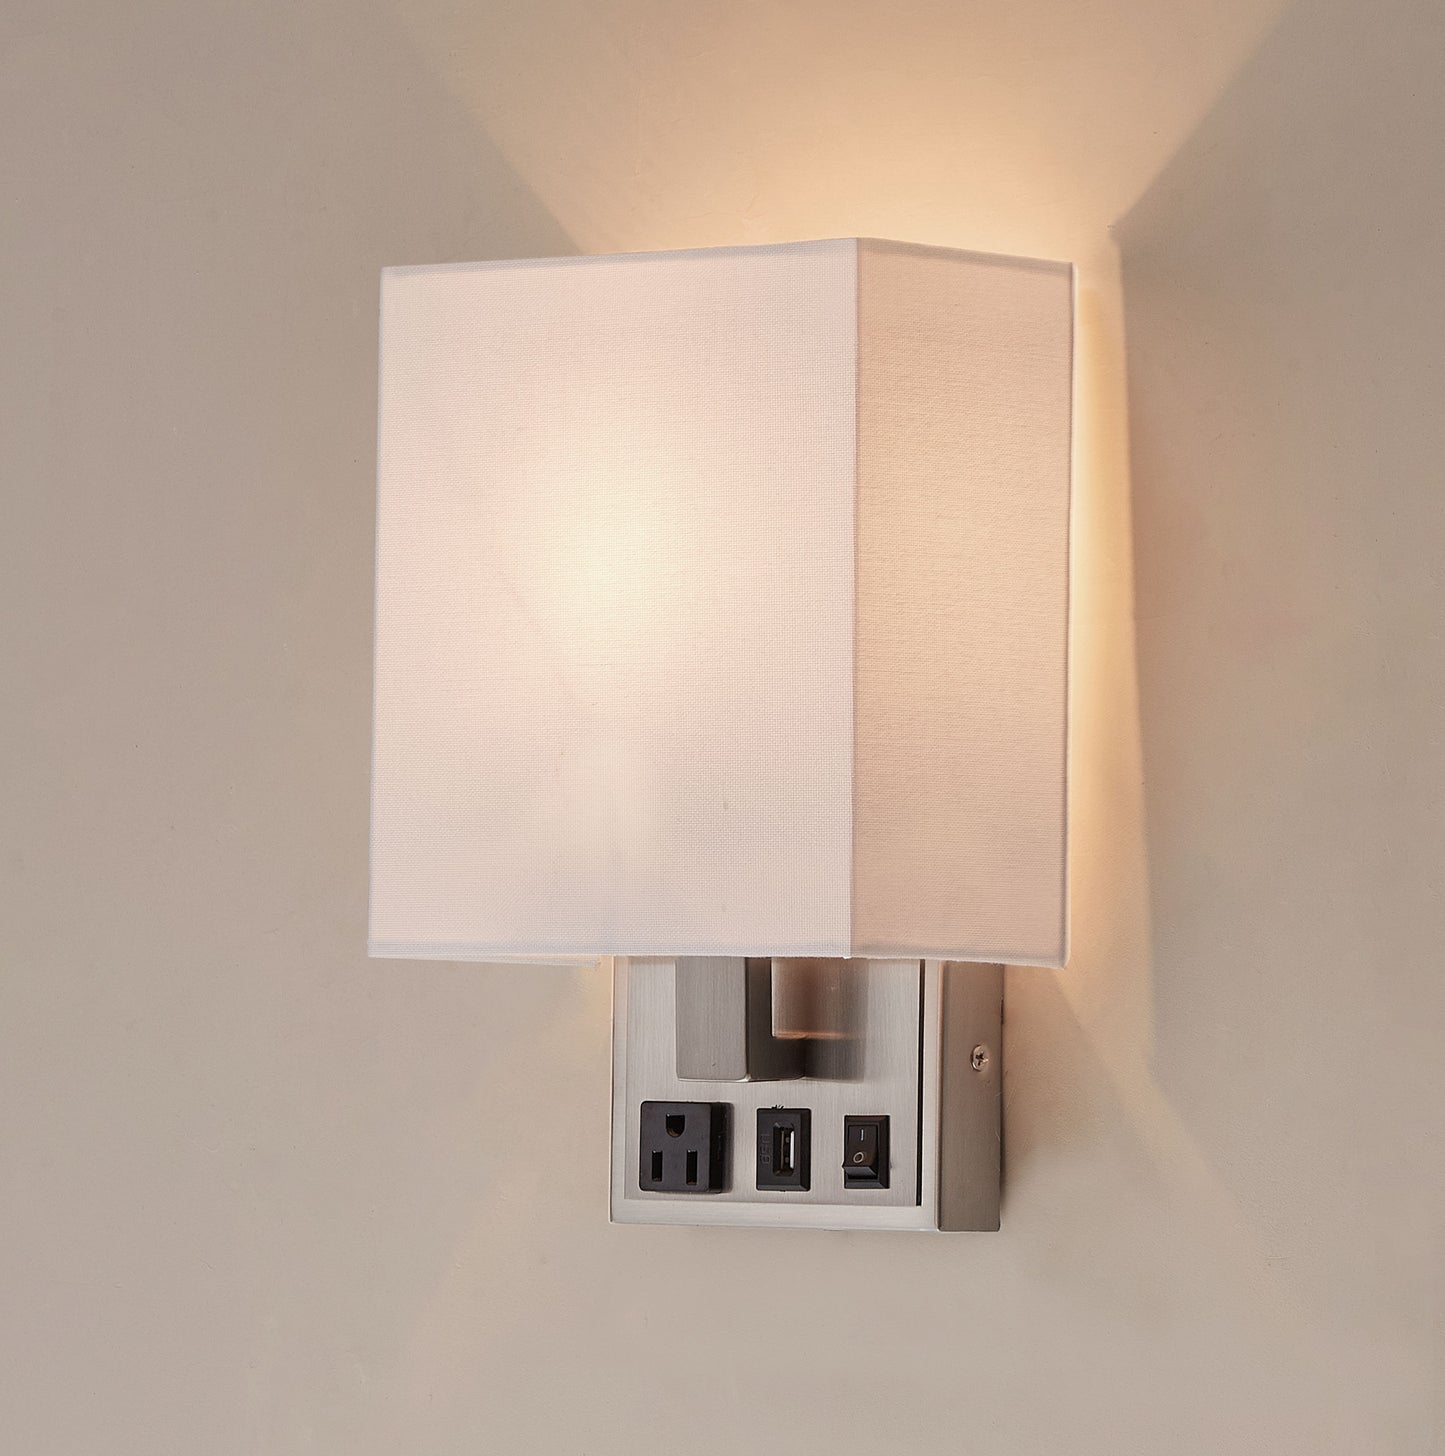 1-Light, Decorative Wall Sconces Light with 1 Switch, 1 USB & 1 Outlet, Satin Nickel Finish w/ White shade, Wall Mounted Lamps for Home Hotel Corridor Restaurant